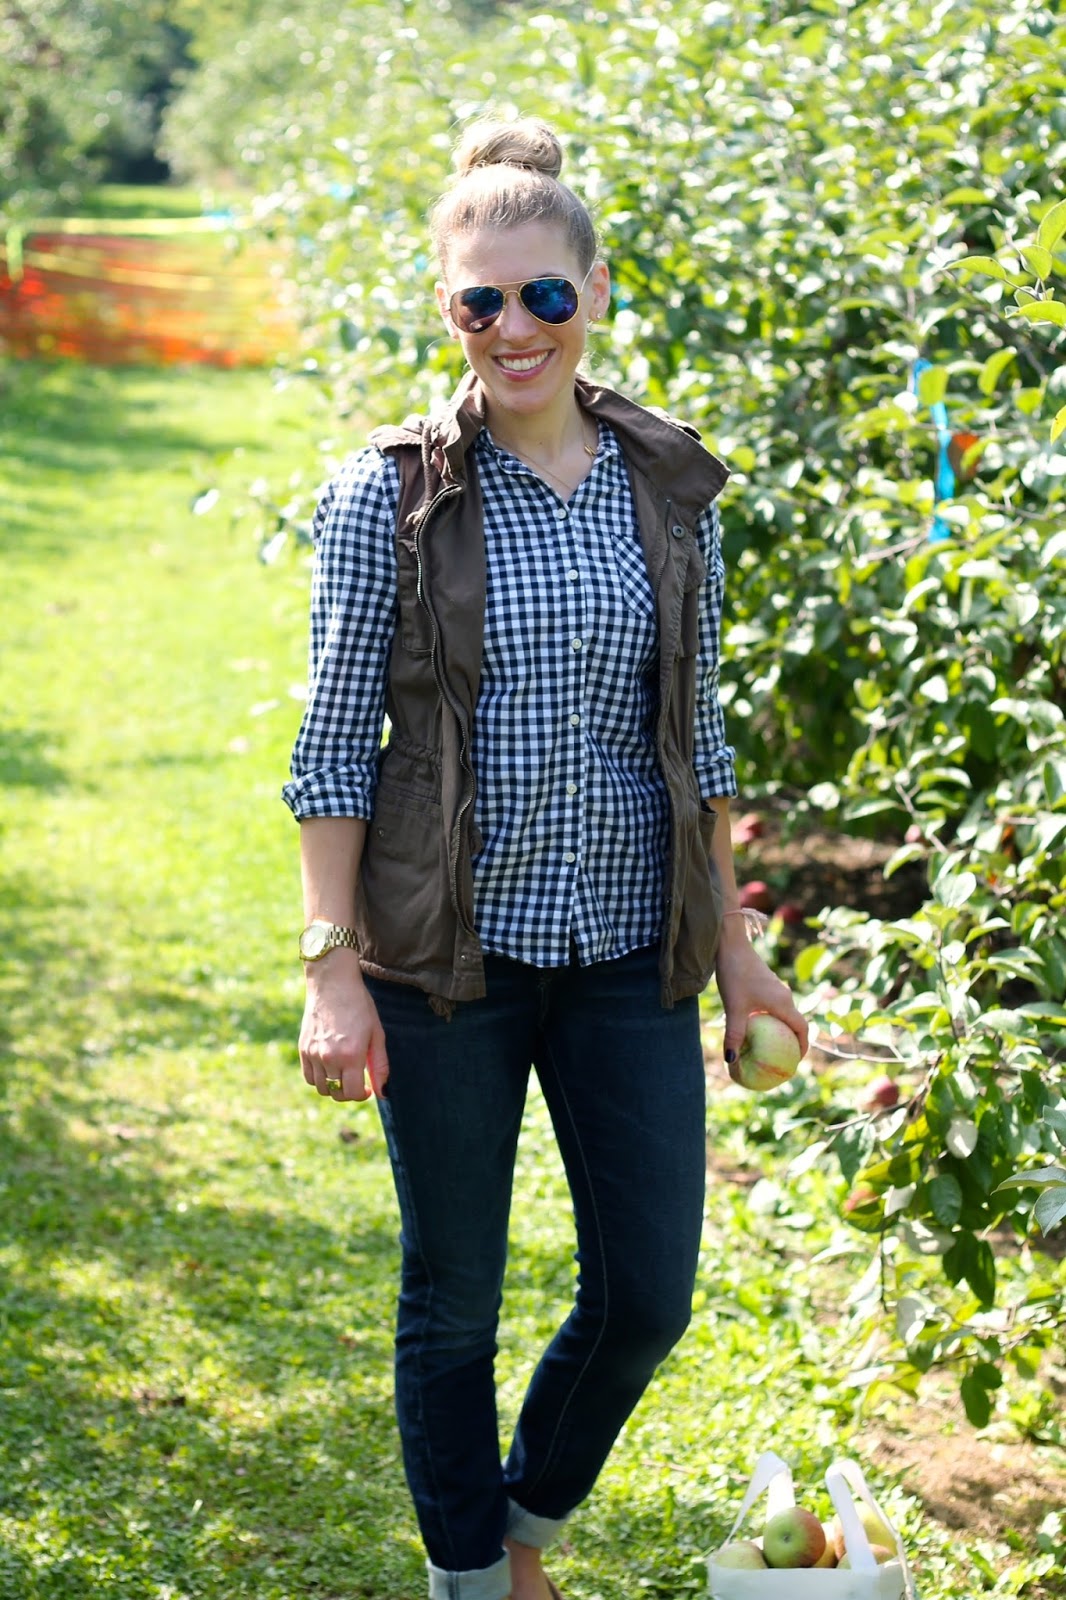 Apple Picking! - I do deClaire